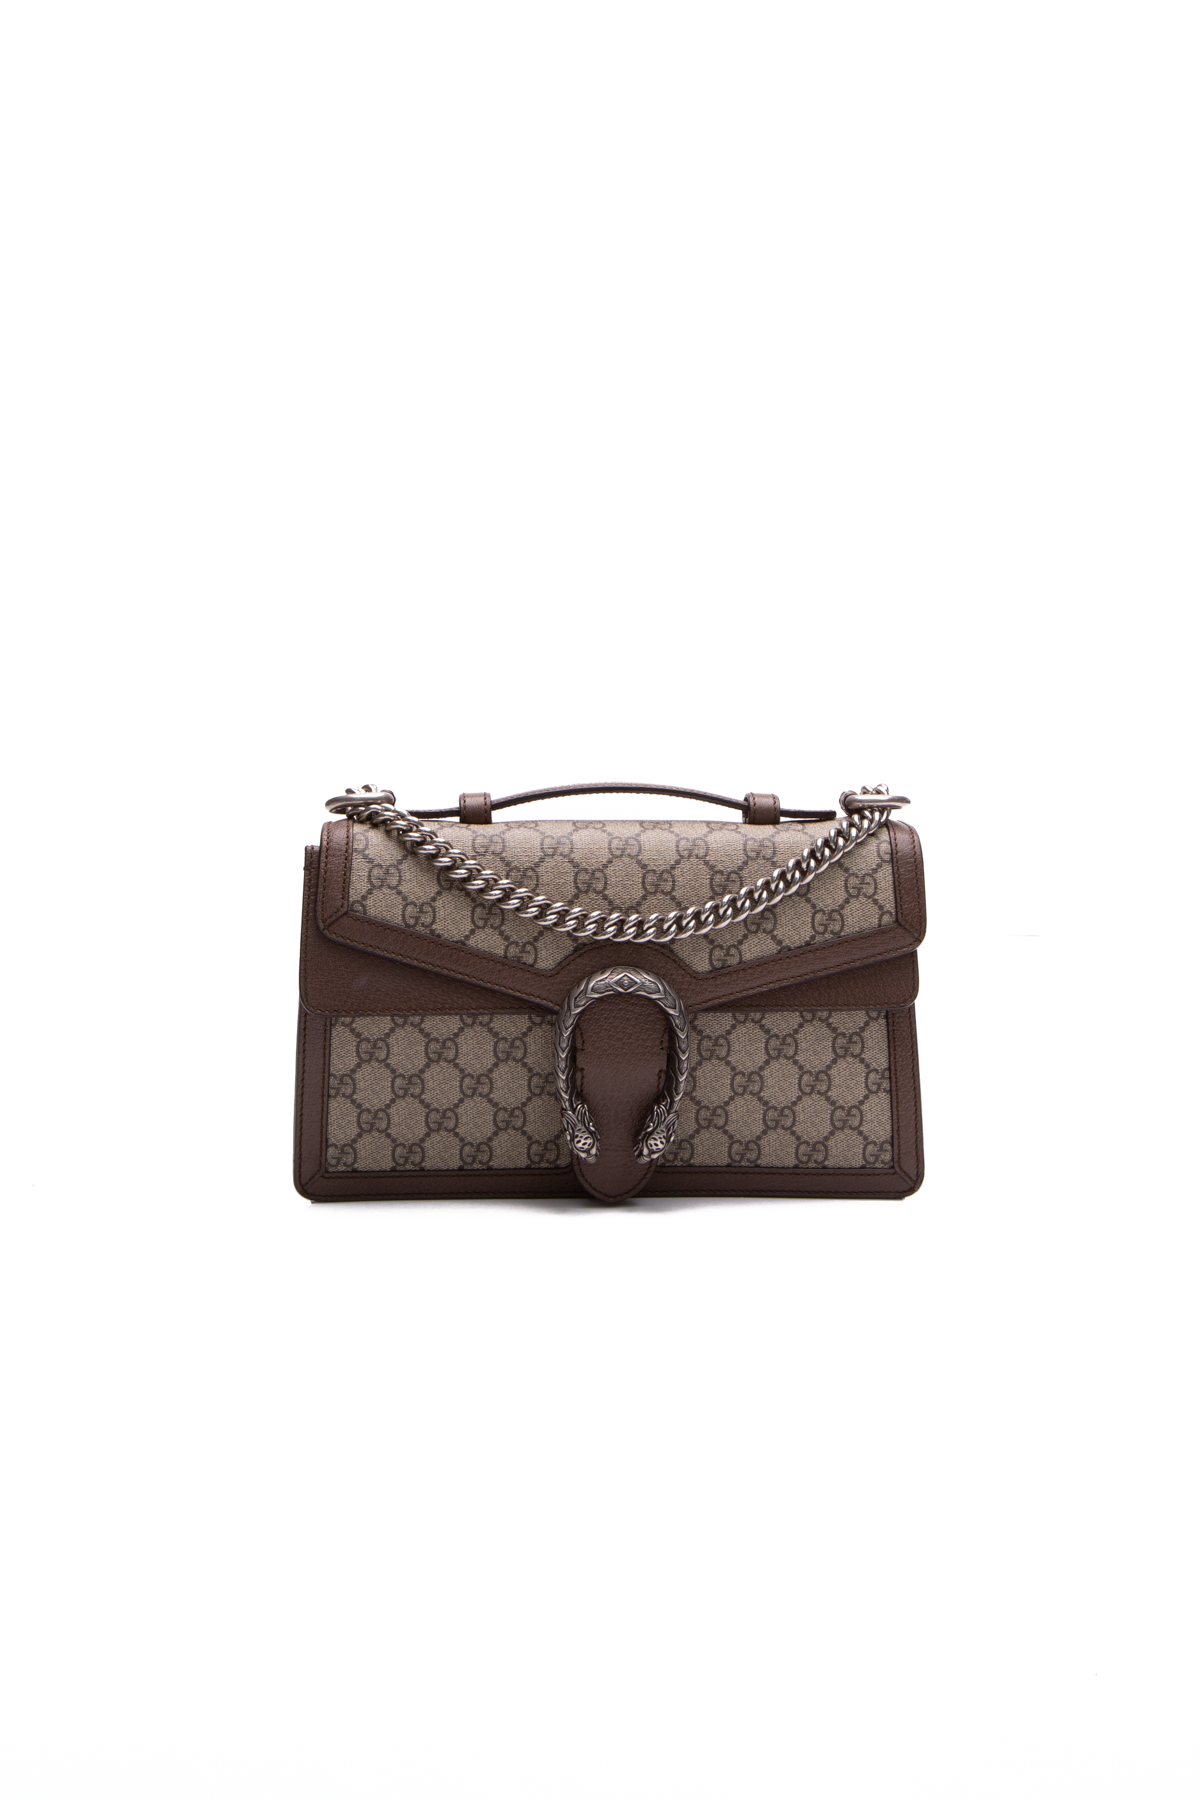 Bags, Gucci Dionysus Size Small Excellent Condition Never Worn